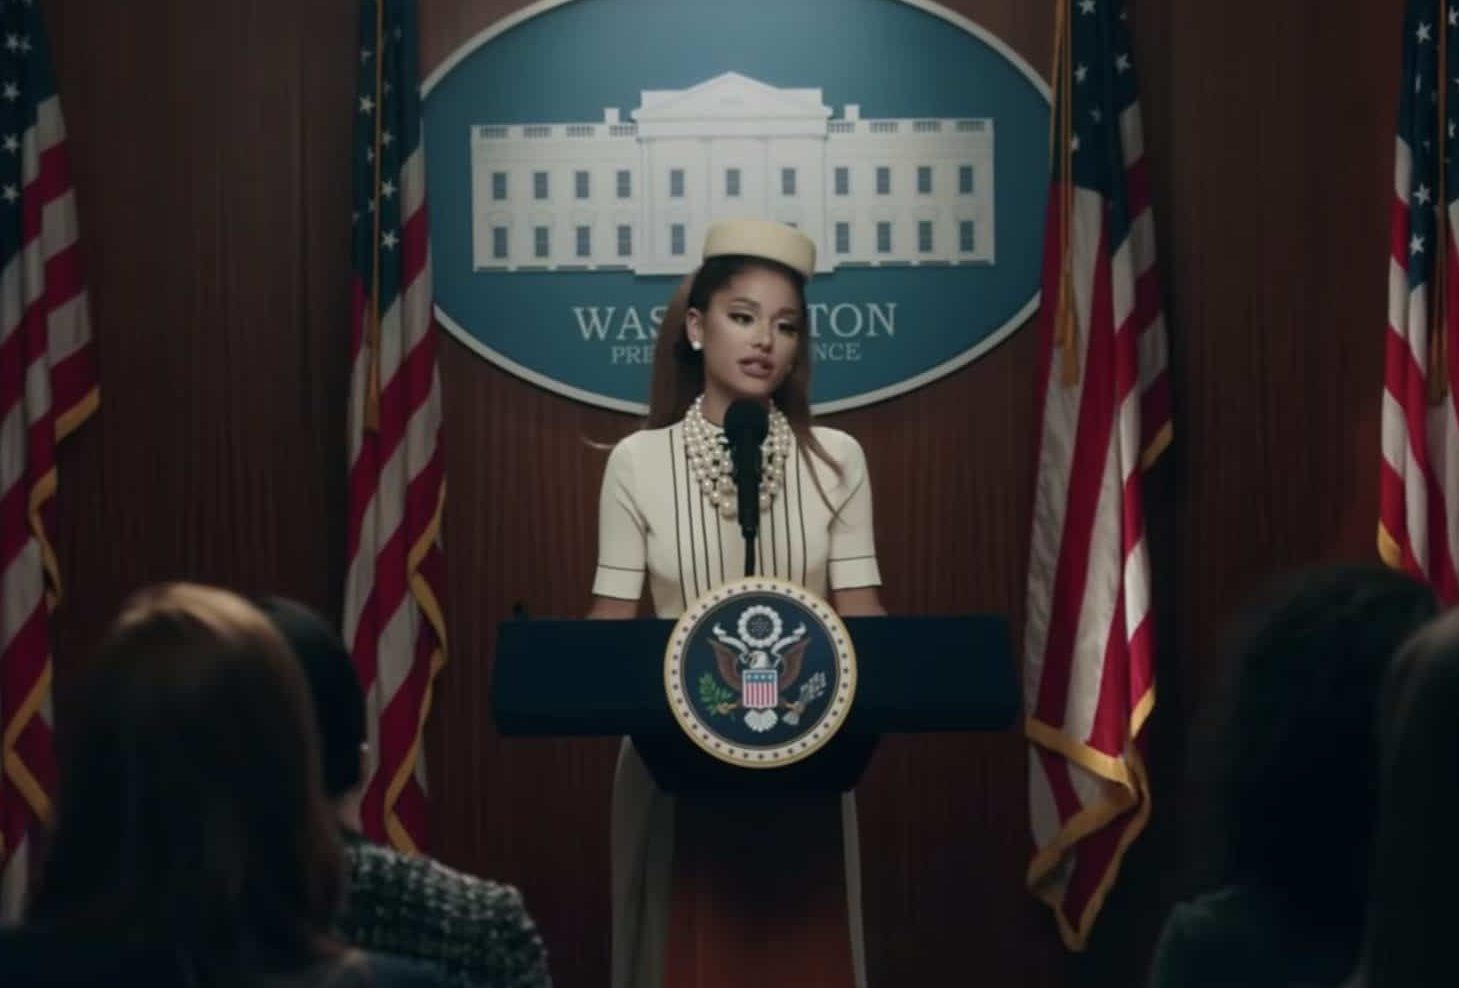 Ariana Grande juggled being US President and home life in the music video for her new song, 'Positions'. (Screen capture via YouTube)